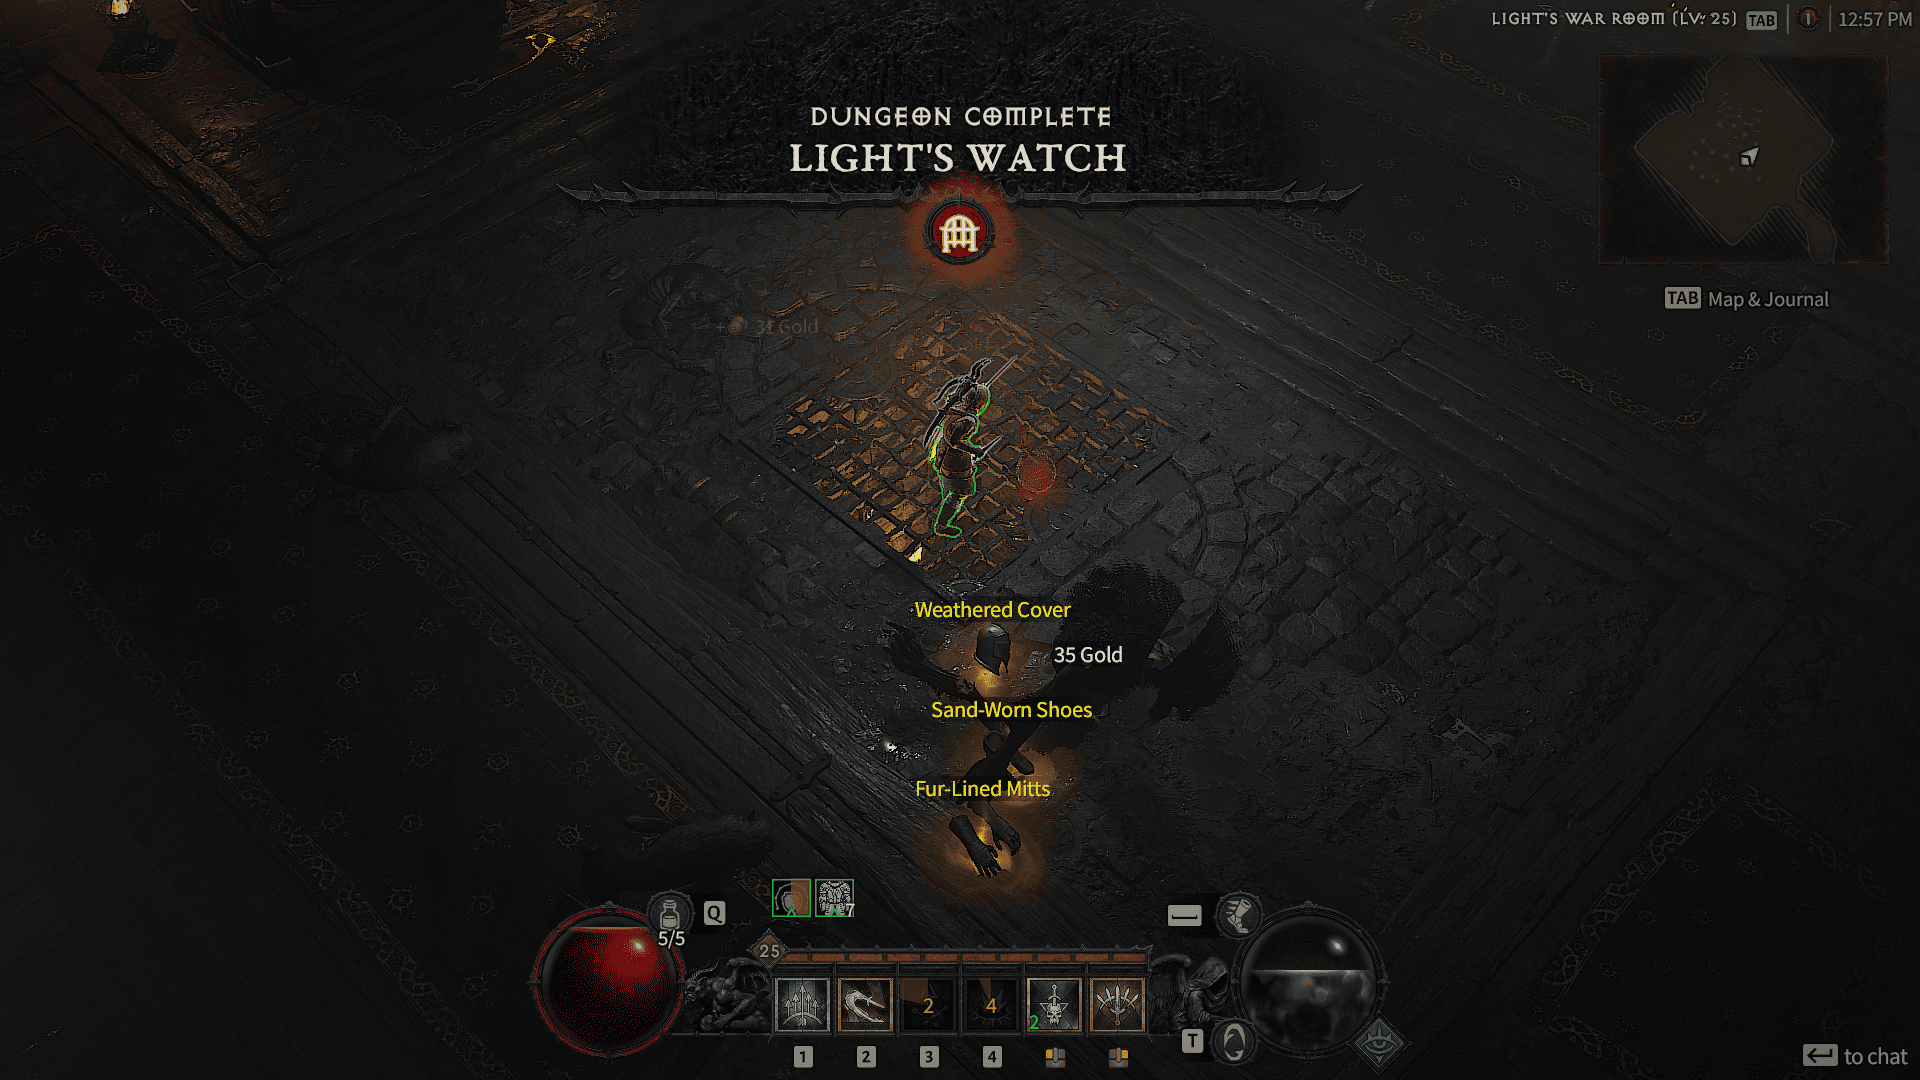 Diablo 4 how to reset dungeons: An image of the player completing a dungeon in the game.